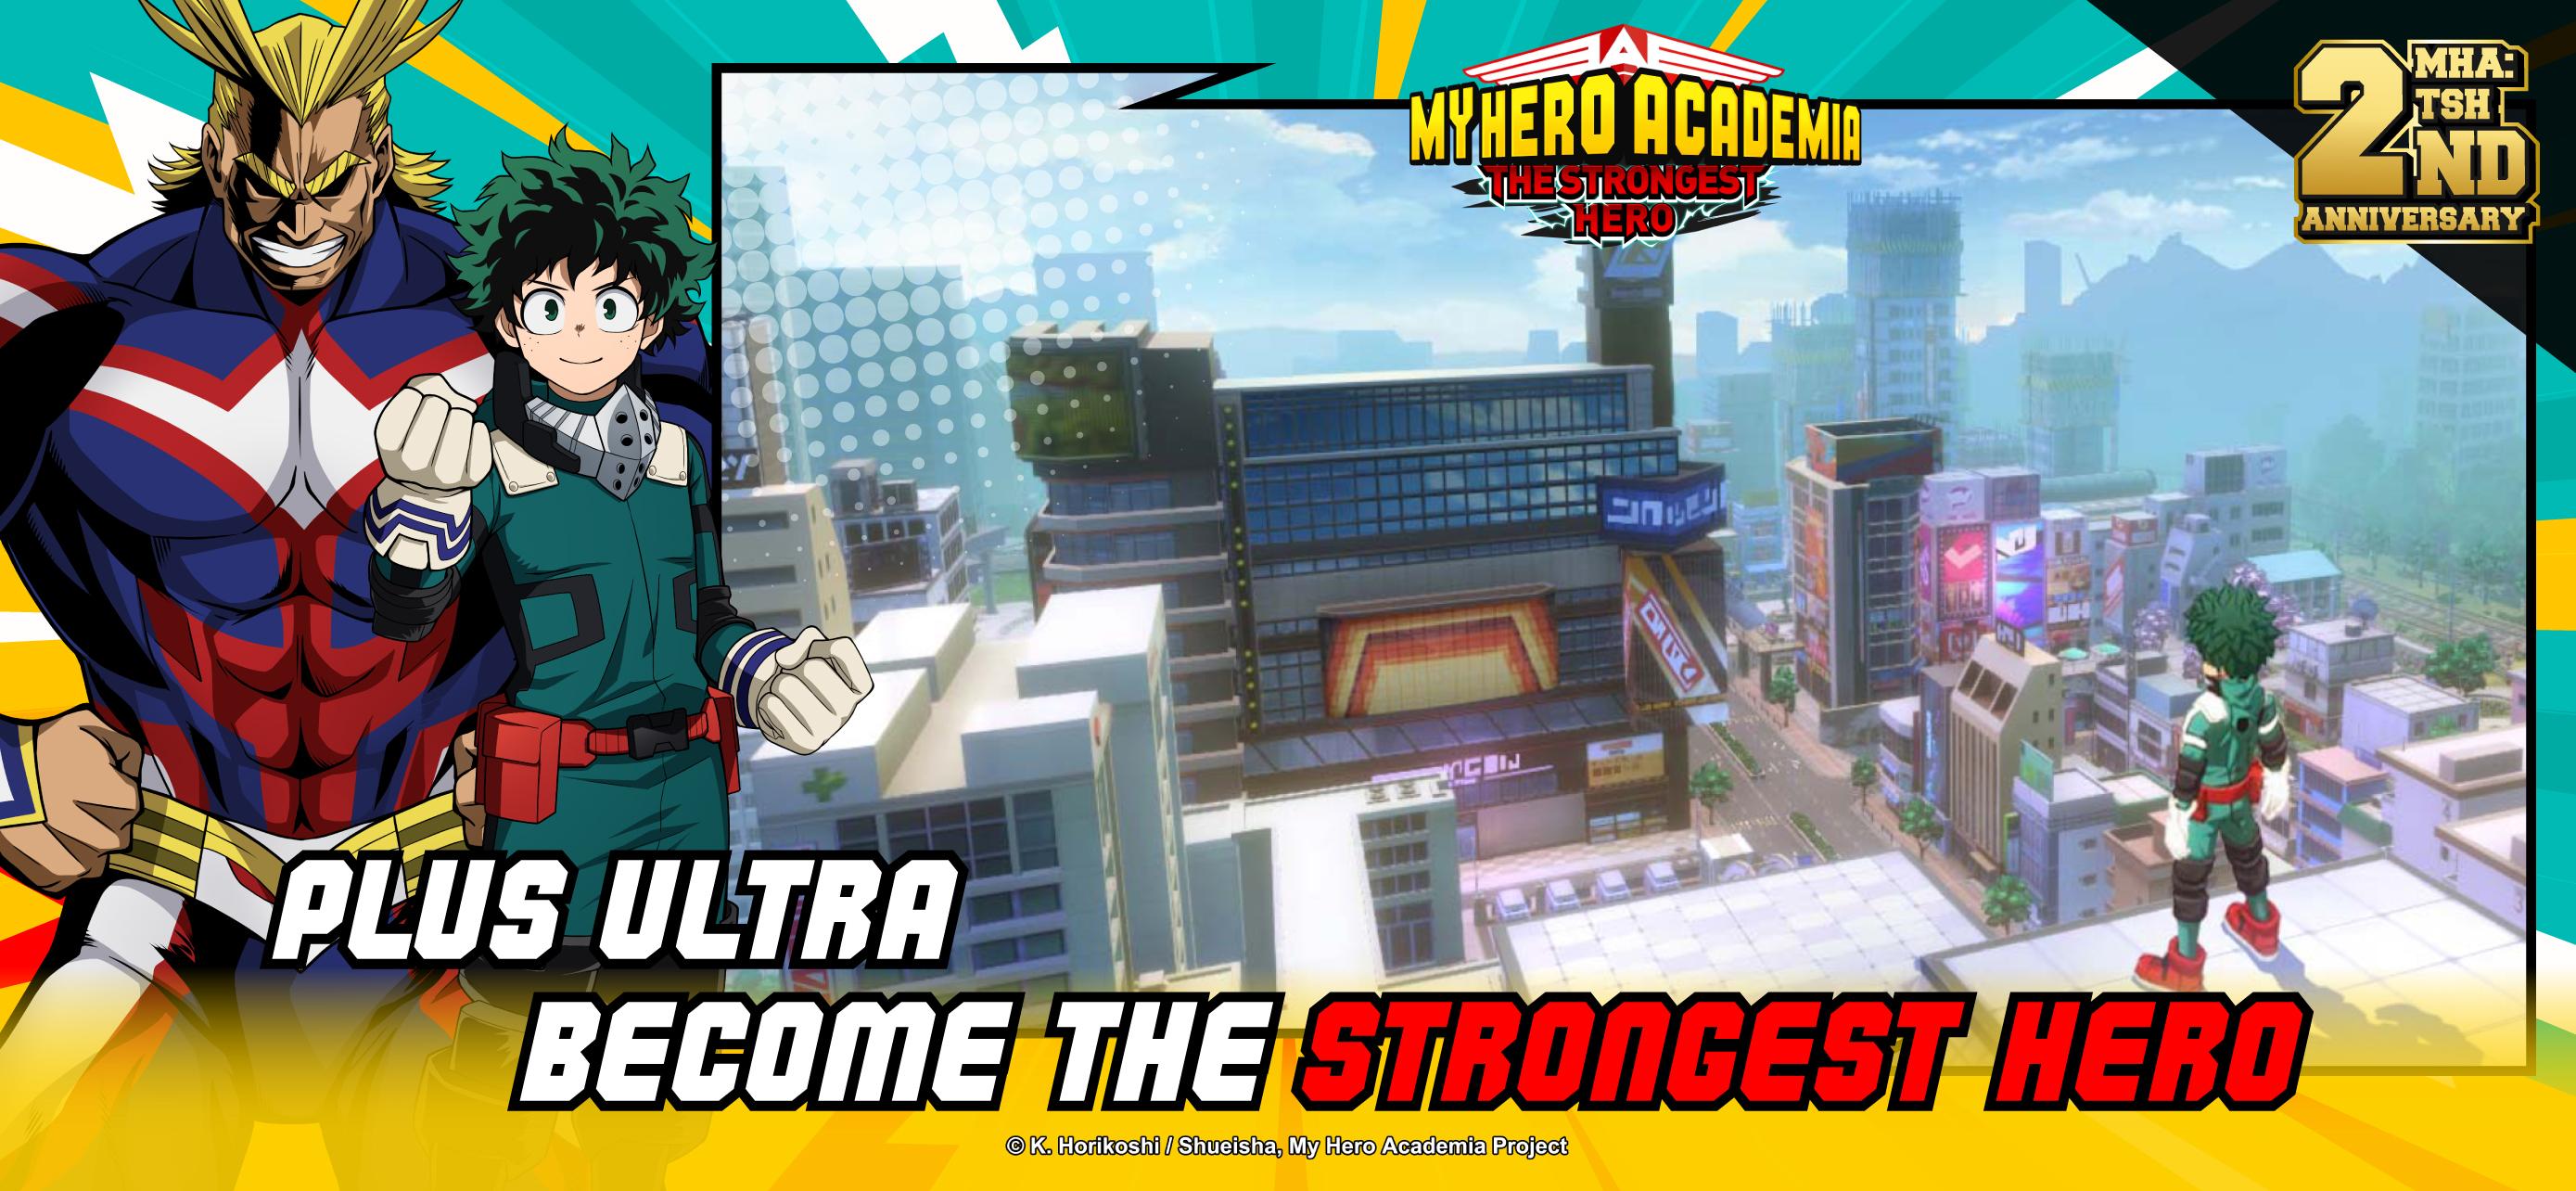 How to Install My Hero Academia: The Strongest Hero on PC with